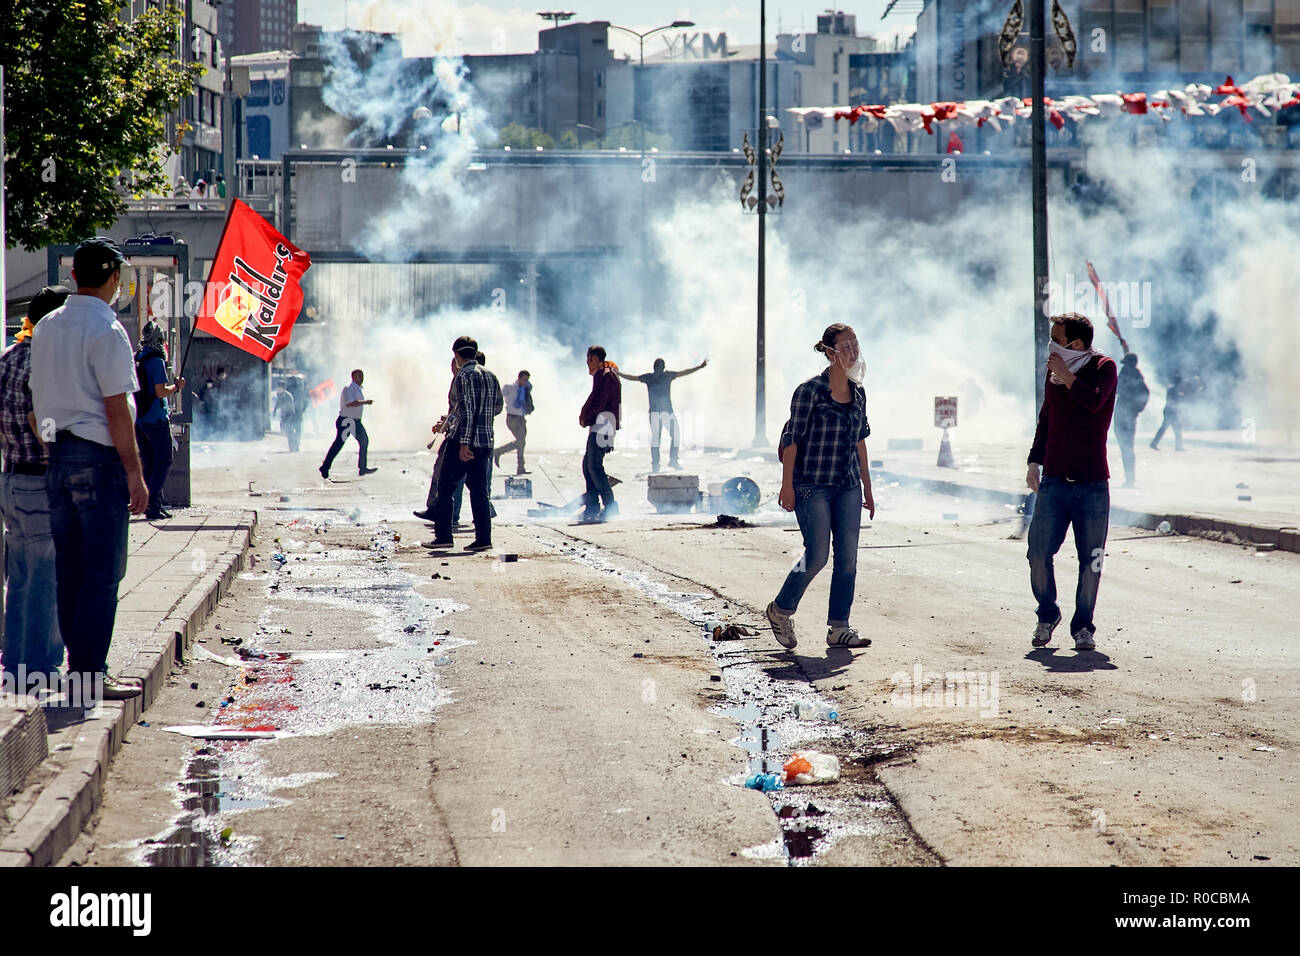 Protesters struggling against the tear gas fired by the police during Gezi park protests in Ankara, Turkey Stock Photo